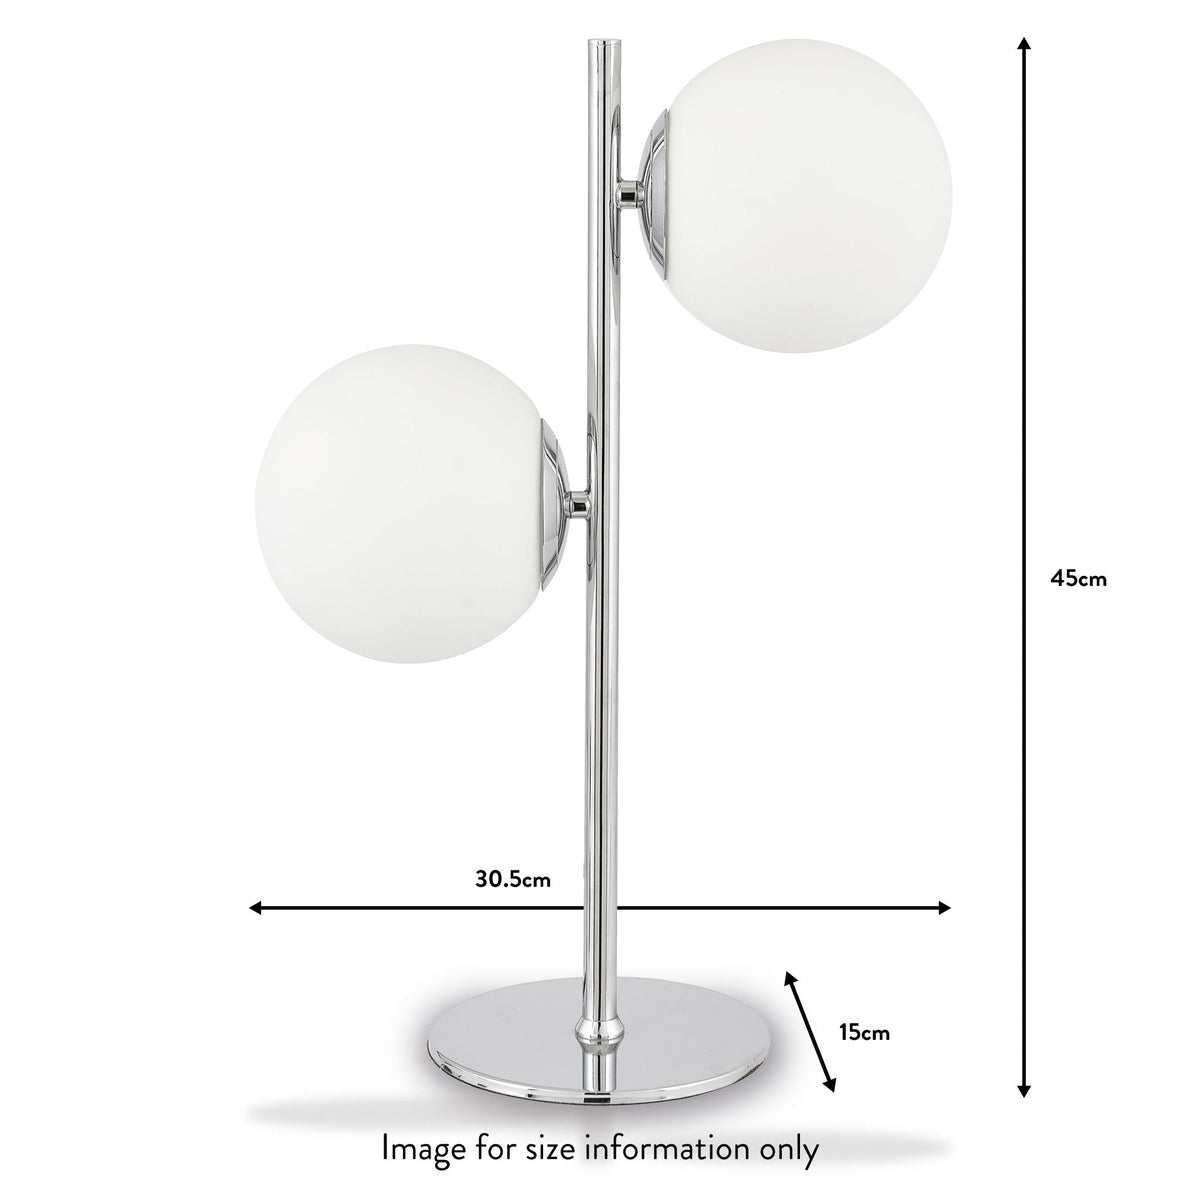 Asterope White Orb and Chrome Metal Table Lamp dimensions